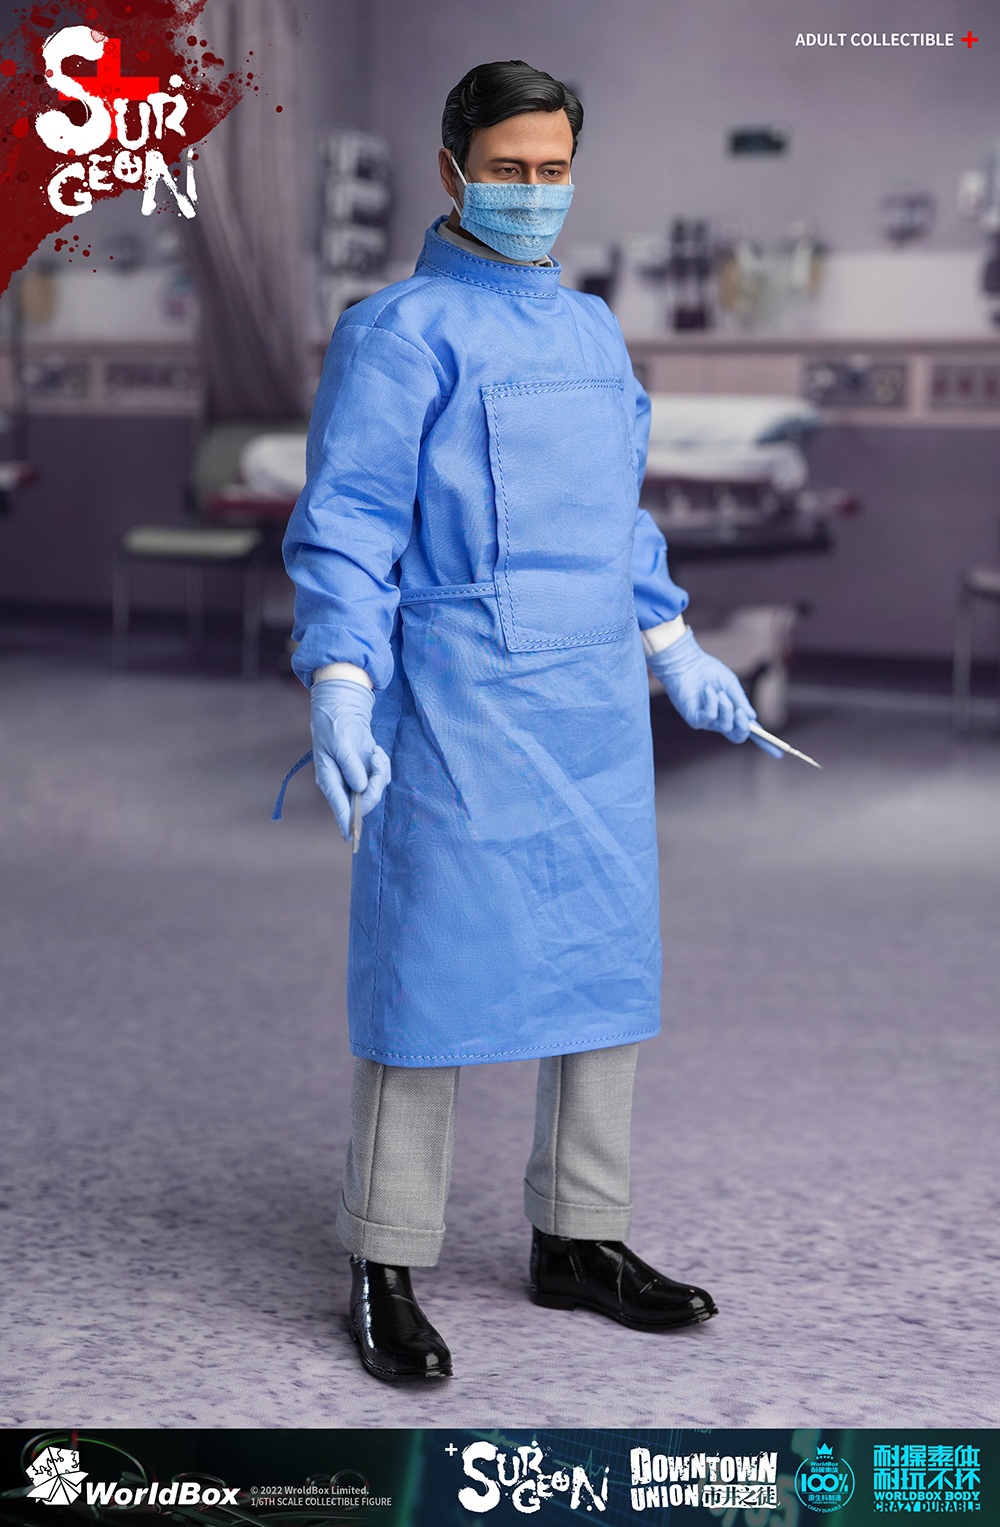 NEW PRODUCT: Worldbox: AT039 1/6 Scale Downtown Union: The Surgeon 12442810